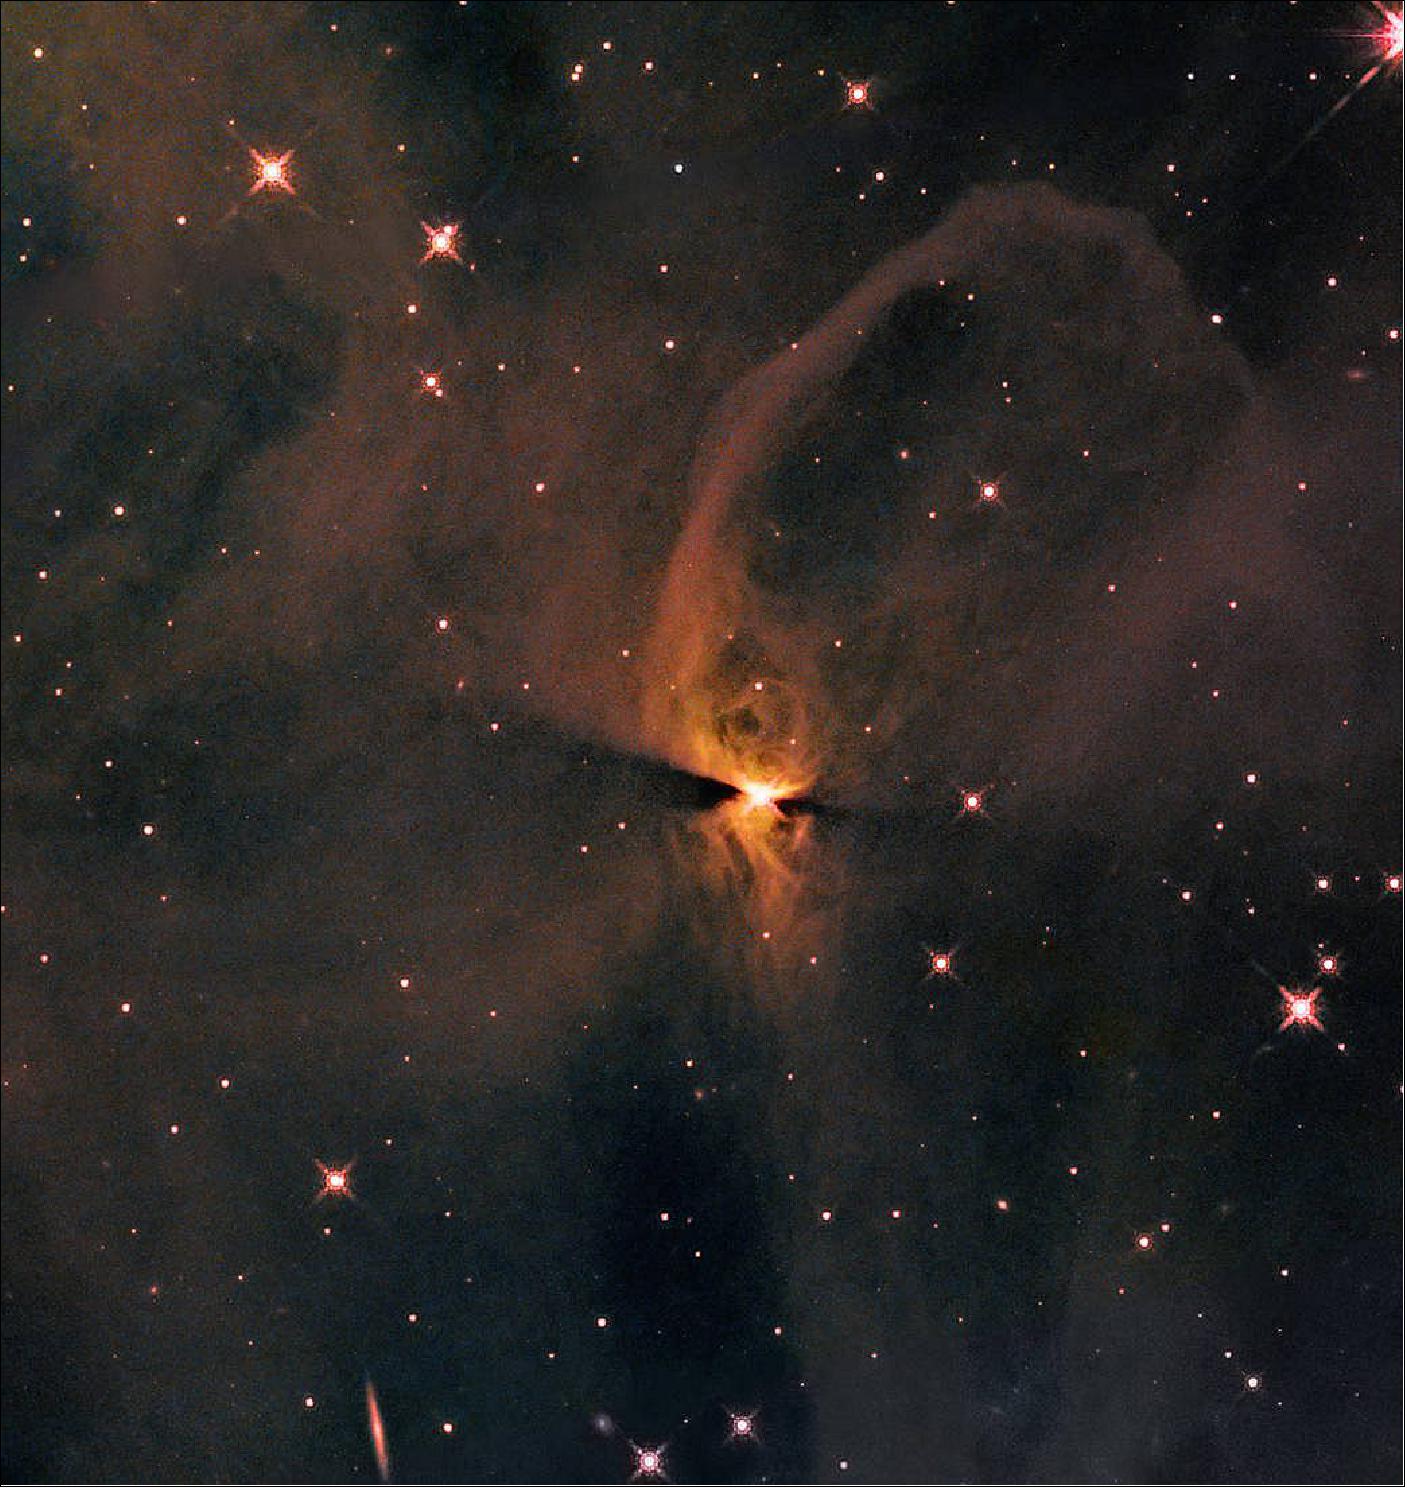 Figure 17: This Hubble infrared image captures a protostar designated J1672835.29-763111.64 in the reflection nebula IC 2631, part of the Chamaeleon star-forming region in the southern constellation Chamaeleon. Protostars shine with the heat energy released by clouds contracting around them and the accumulation of material from the nearby gas and dust. Eventually enough material collects, and the core of a protostar becomes hot and dense enough for nuclear fusion to begin, and the transformation into a star is complete. The leftover gas and dust can become planets, asteroids, comets, or remain as dust [image credit: NASA, ESA, T. Megeath (University of Toledo), and K. Stapelfeldt (Jet Propulsion Laboratory); Processing: Gladys Kober (NASA/Catholic University of America)]